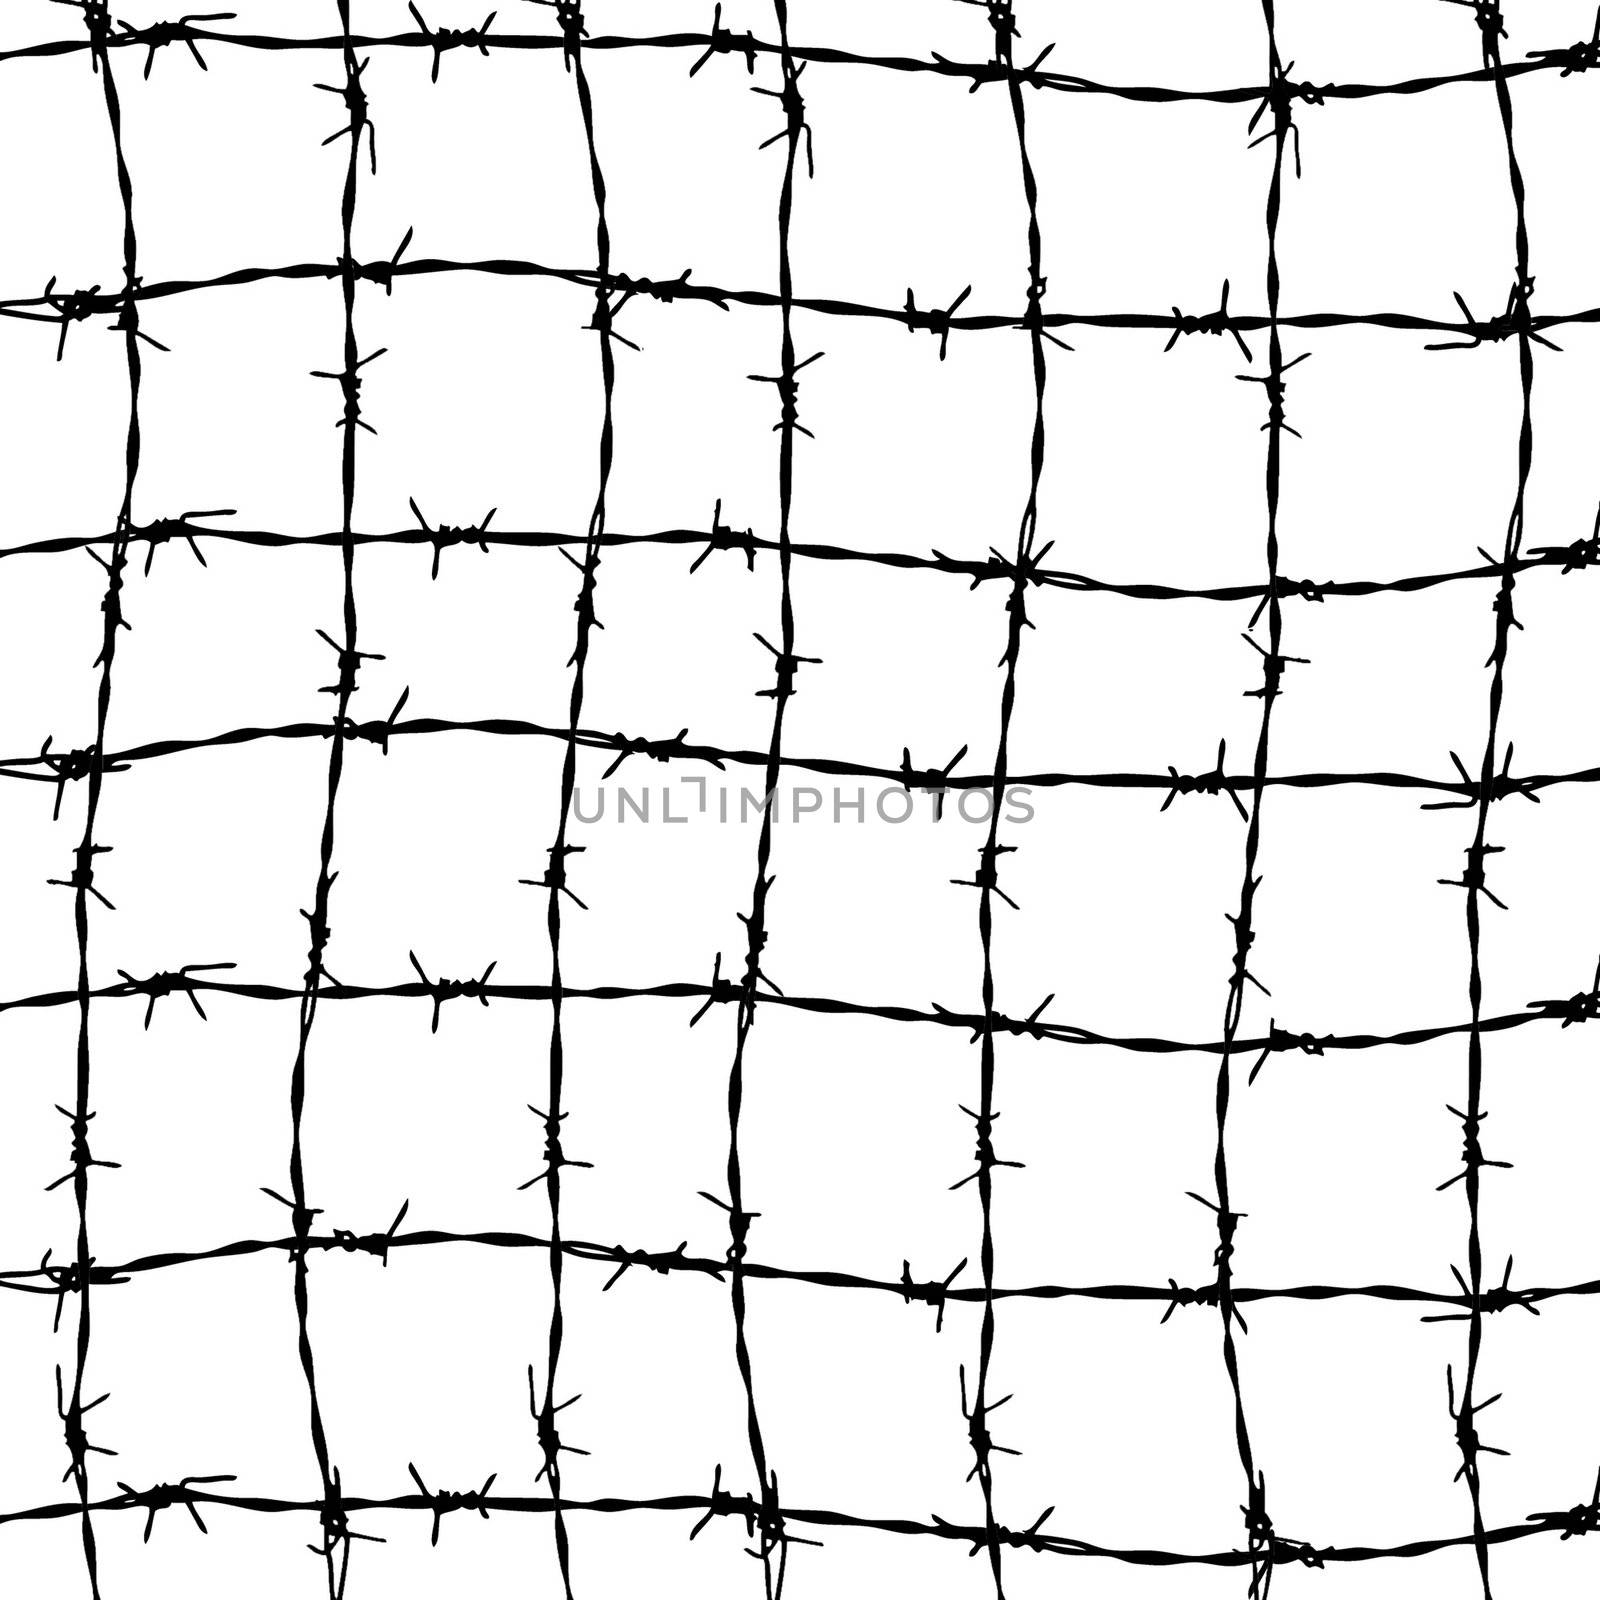 fence from barbed wires isolated on white background